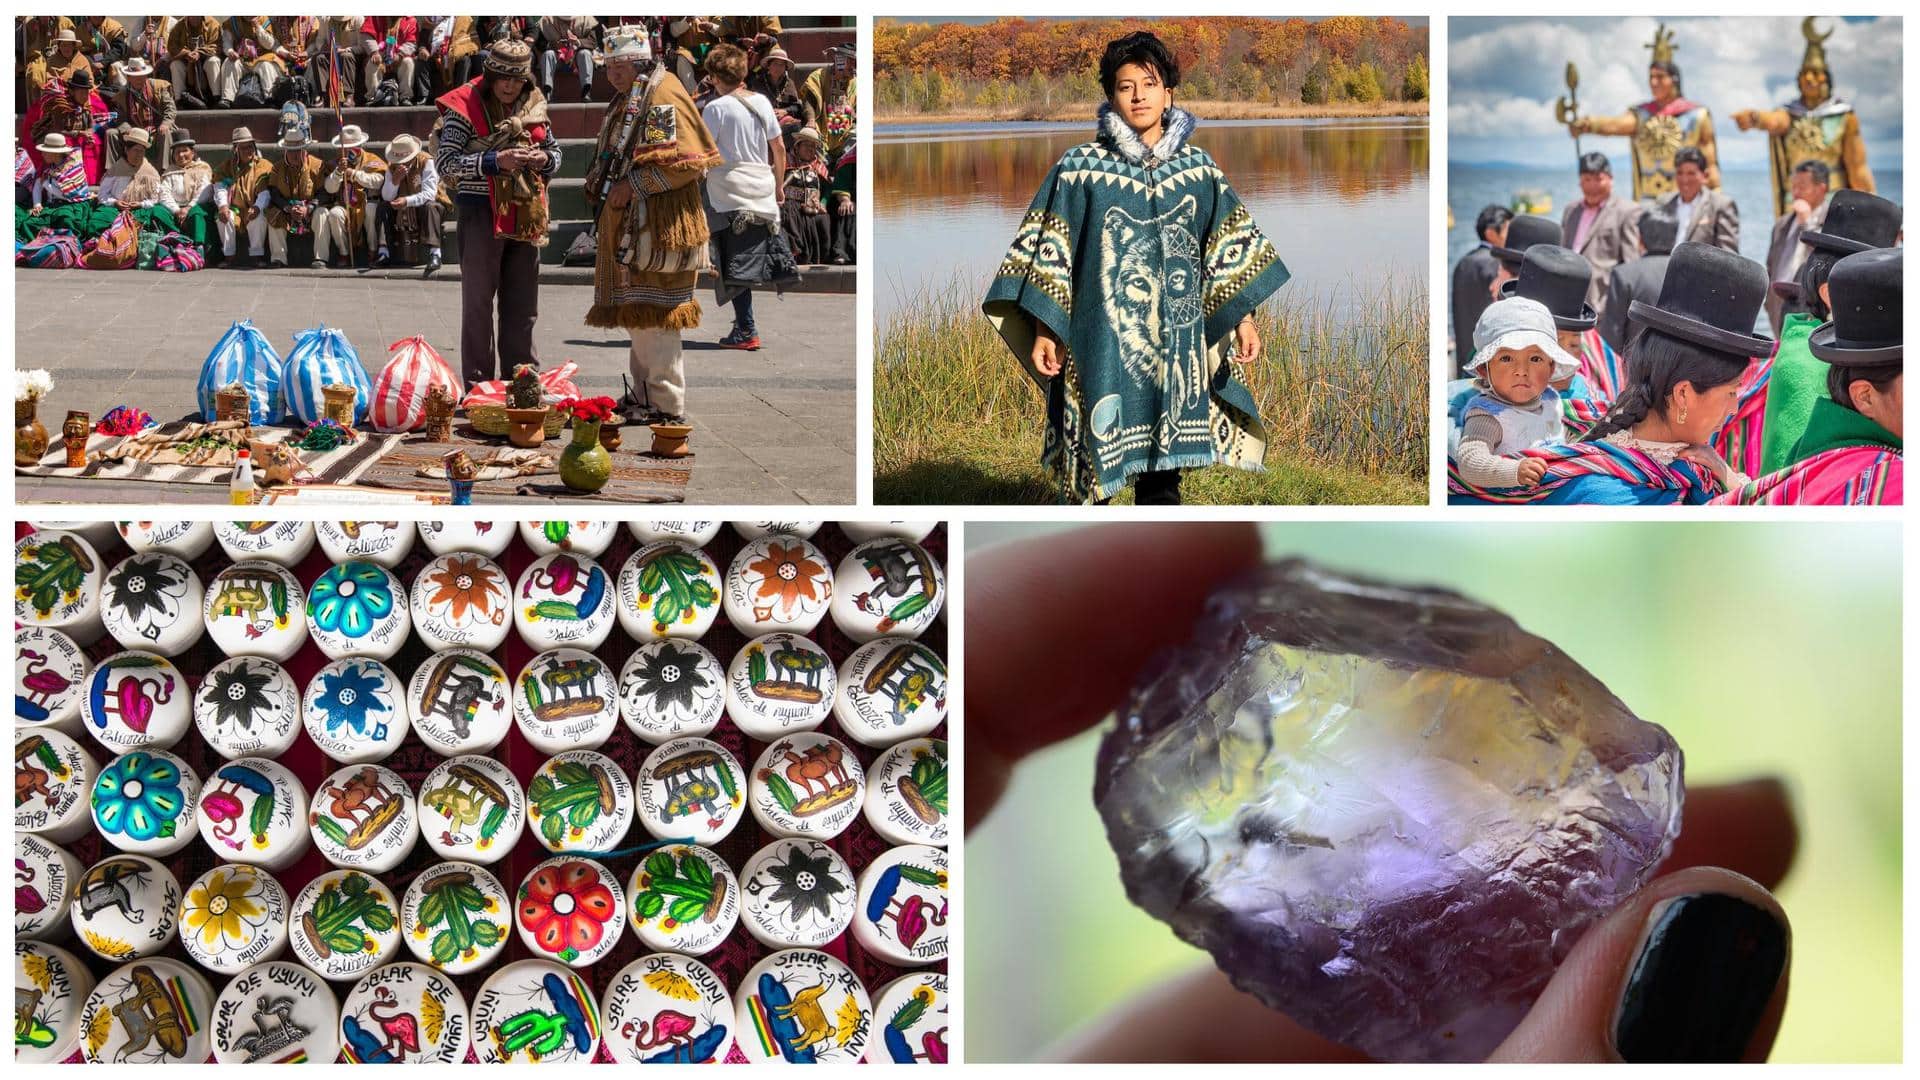 5 souvenirs to get home from your trip to Bolivia